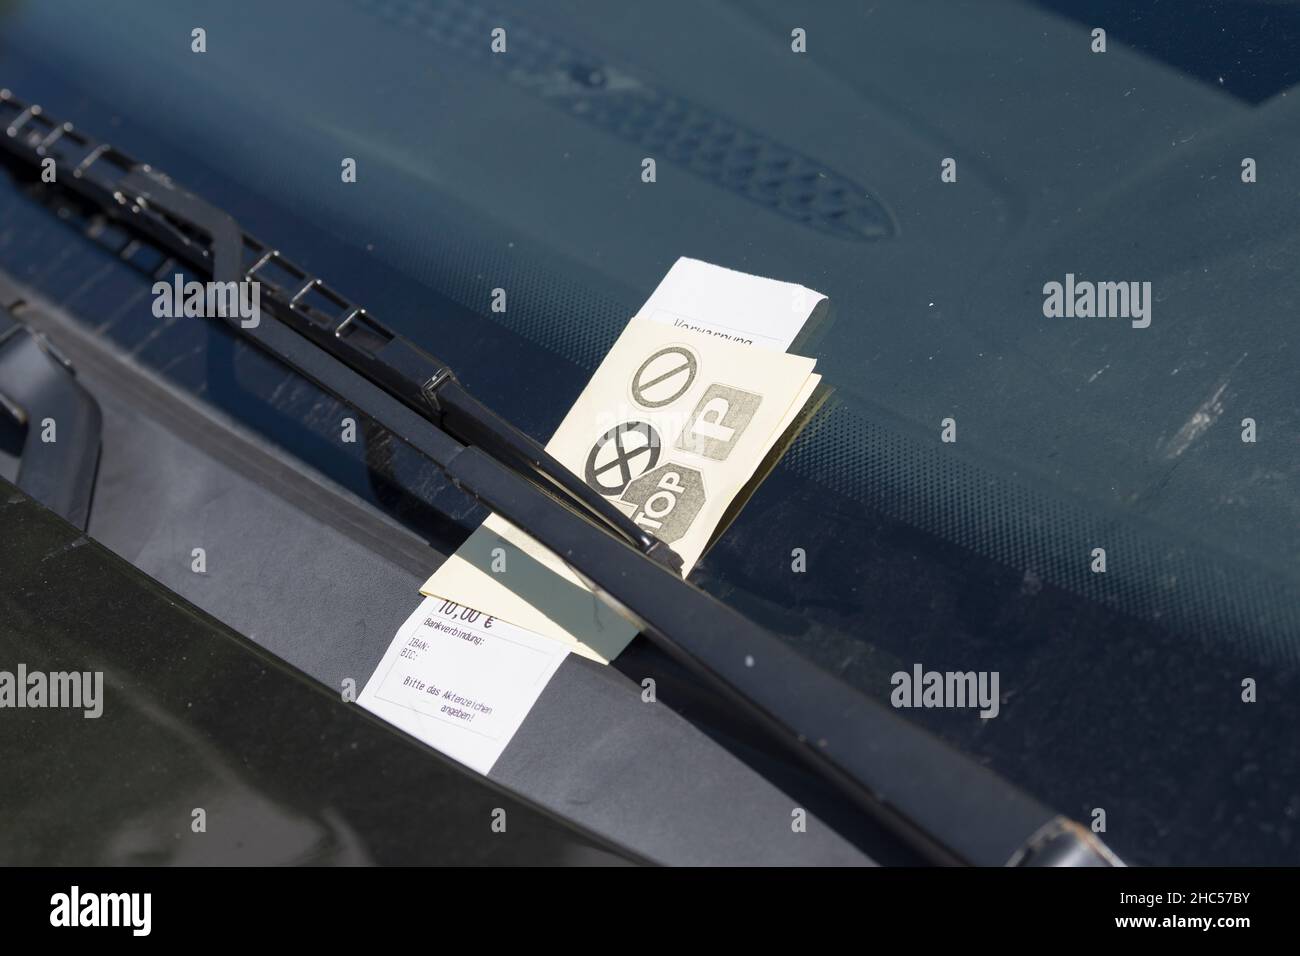 Parking ticket behind the windshield wiper Stock Photo